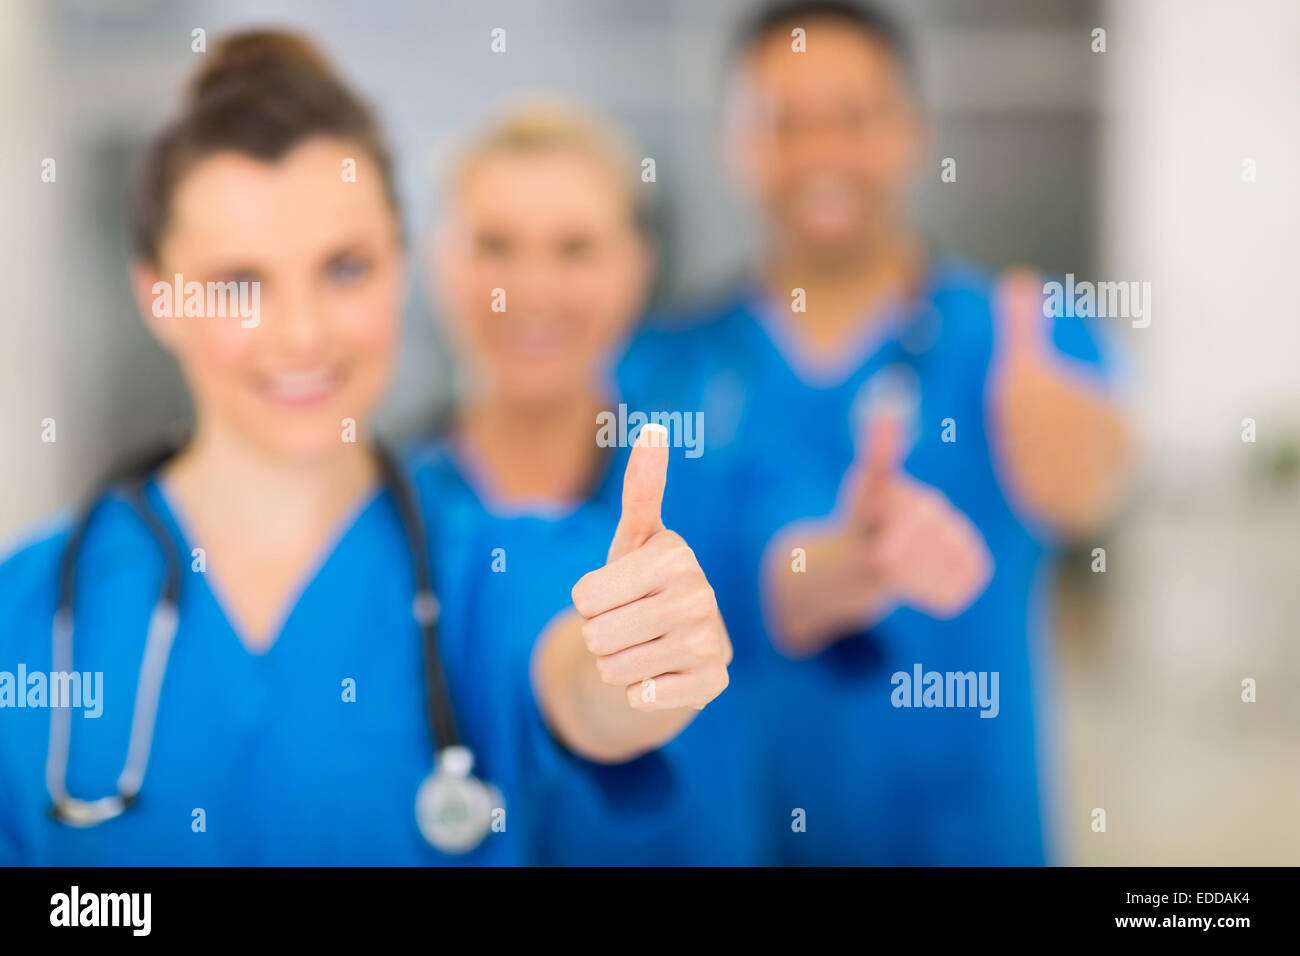 group of successful hospital staff thumbs up Stock Photo